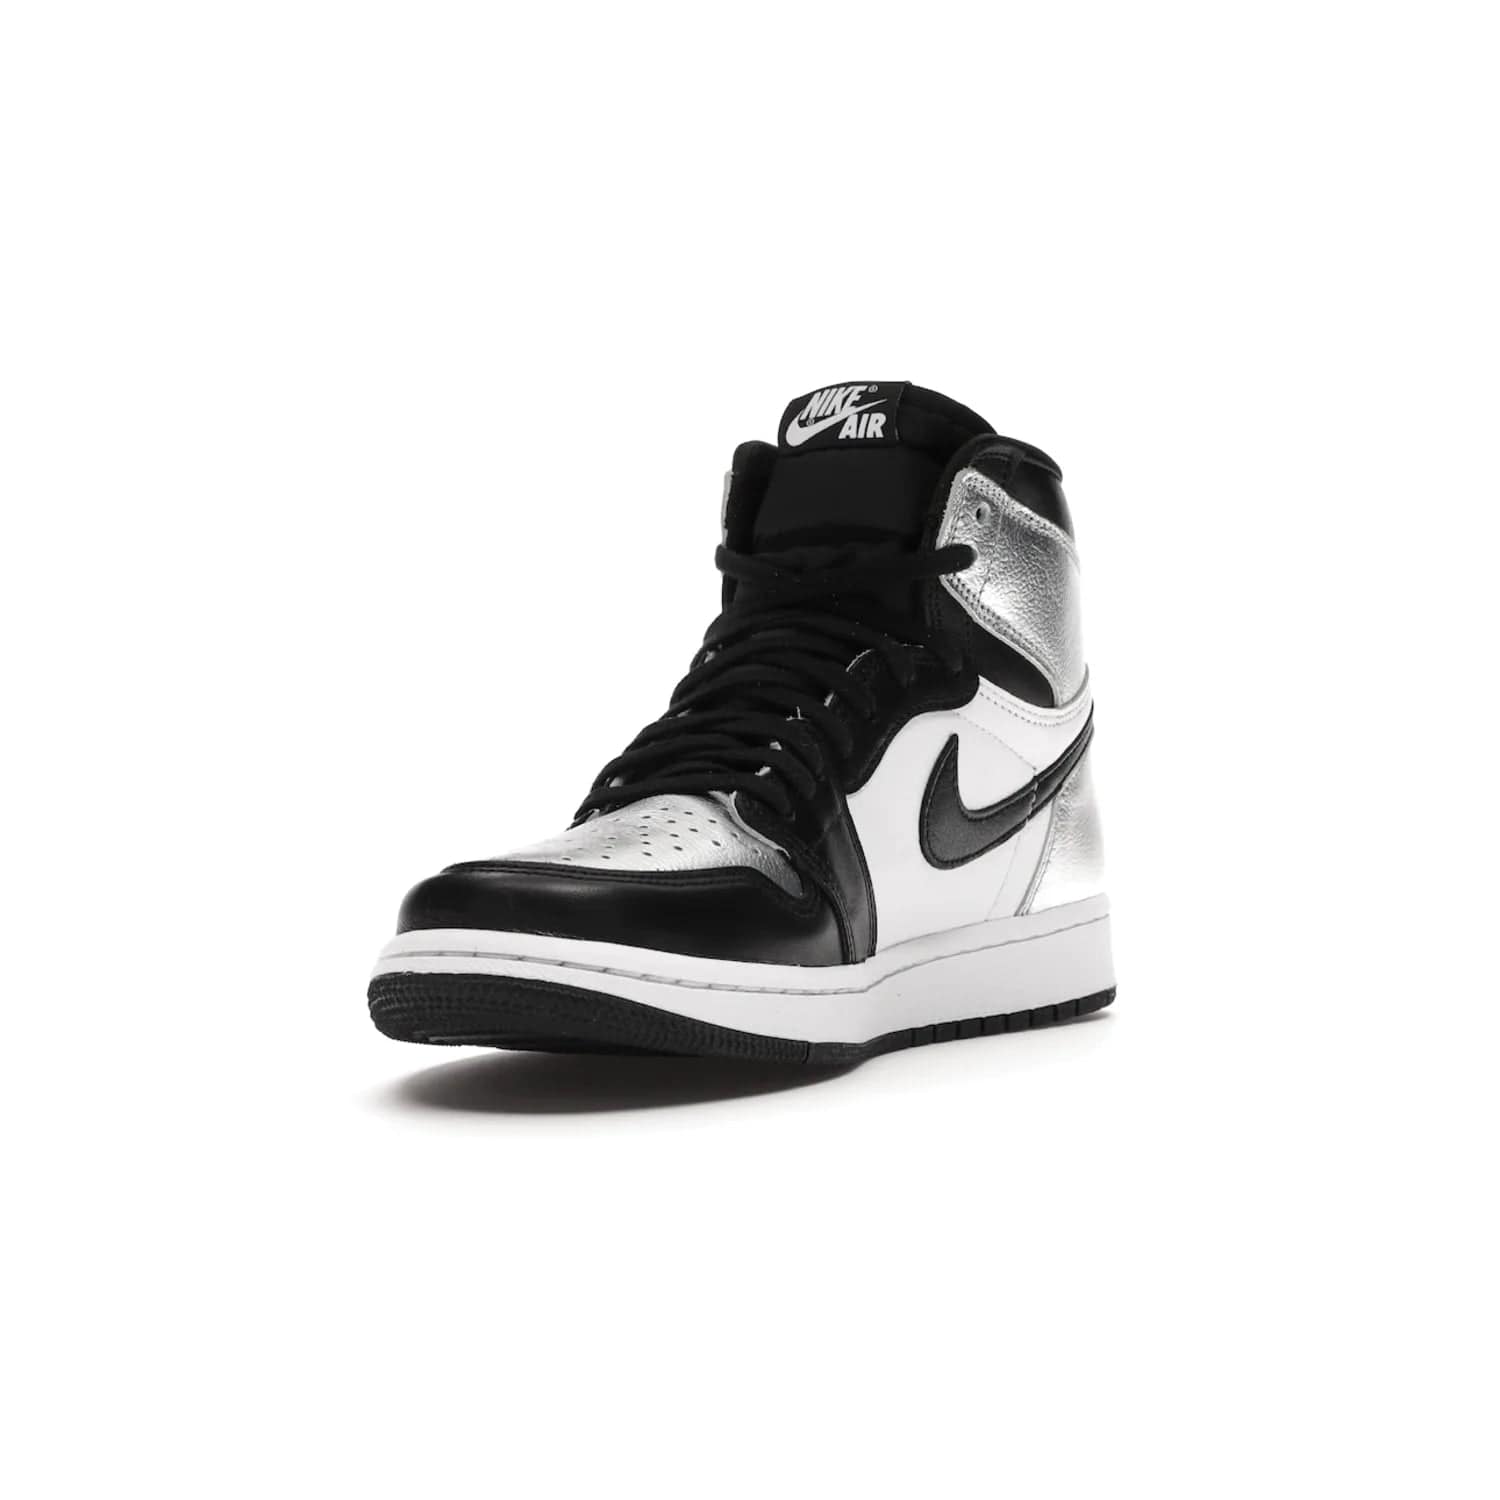 Jordan 1 Retro High Silver Toe (Women's) - Image 13 - Only at www.BallersClubKickz.com - Introducing the Jordan 1 Retro High Silver Toe (Women's): an updated spin on the iconic 'Black Toe' theme. Featuring white & black leather and silver patent leather construction. Nike Air branding, Air Jordan Wings logo, and white/black sole finish give a classic look. The perfect addition to an on-trend streetwear look. Available in classic black & white, this Jordan 1 is an instant classic. Released in February 20